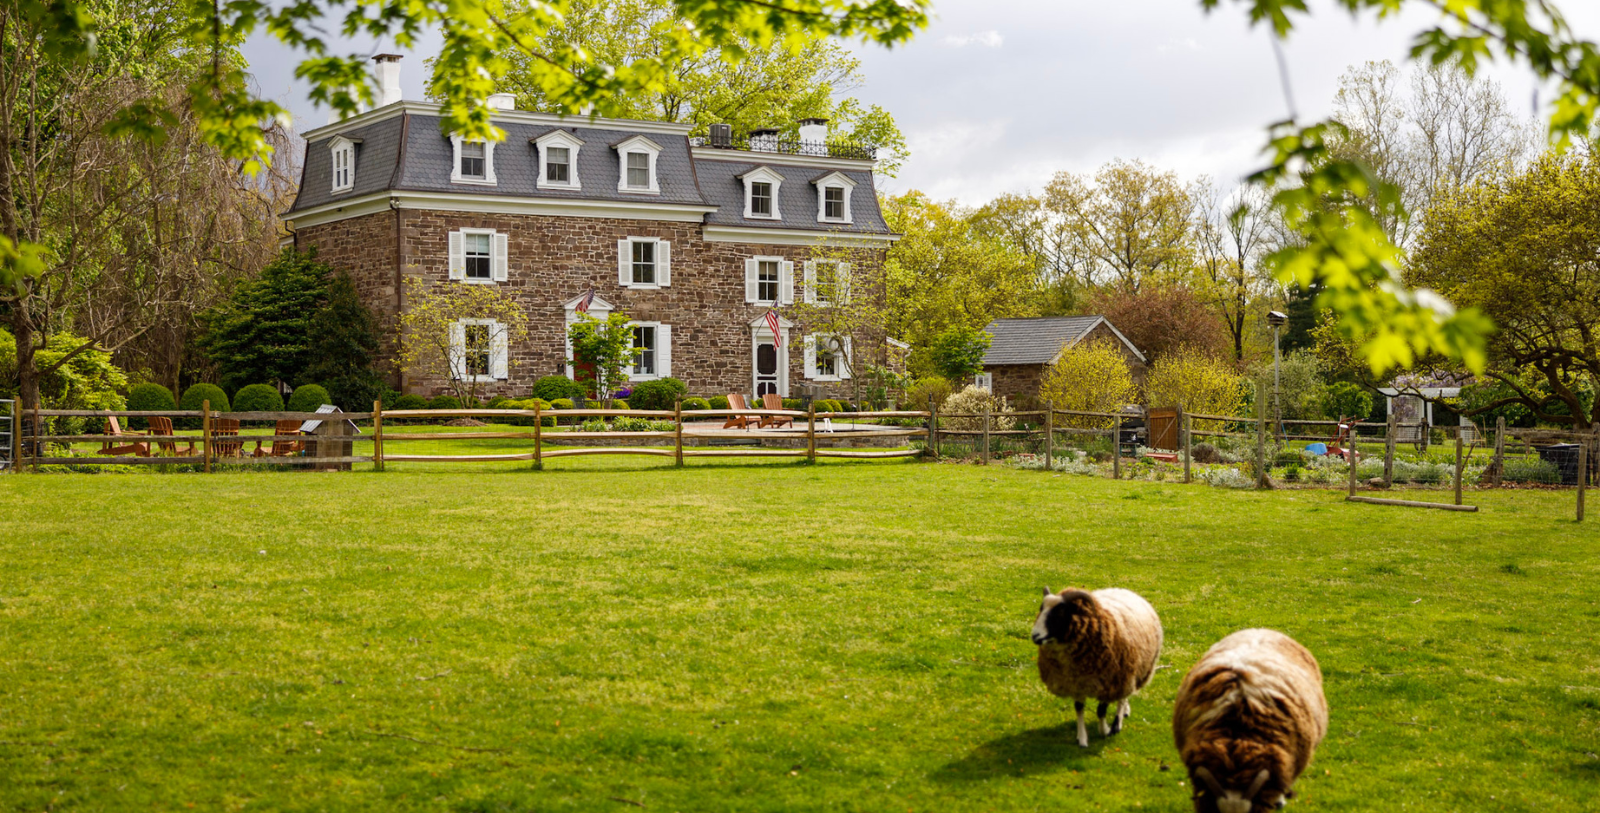 Discover the Federal-style architecture that has defined the Woolverton Inn for centuries.